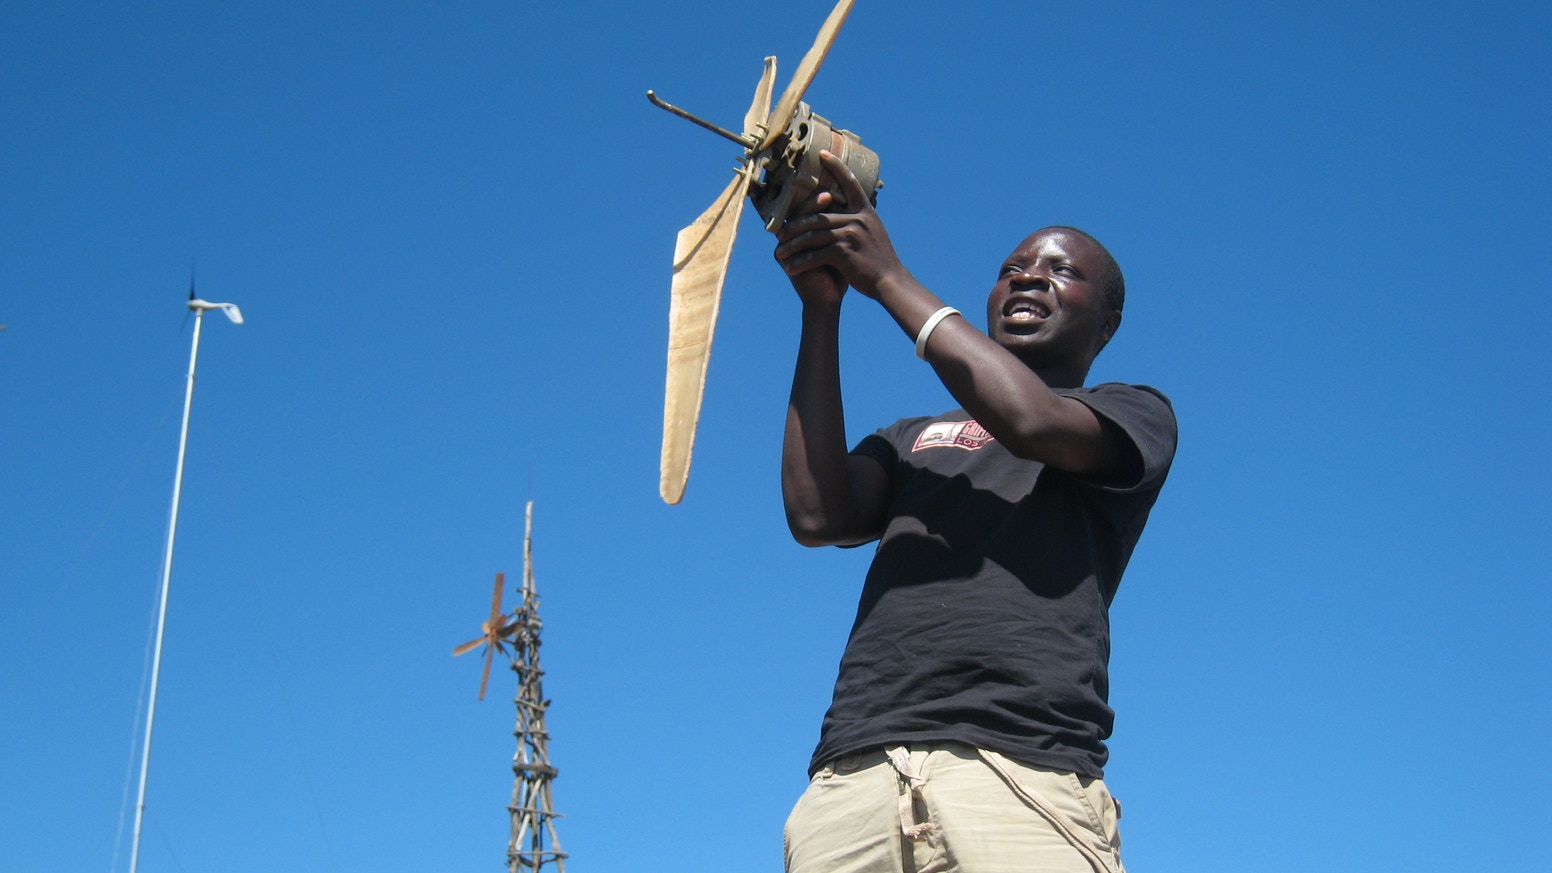 How I harnessed the wind